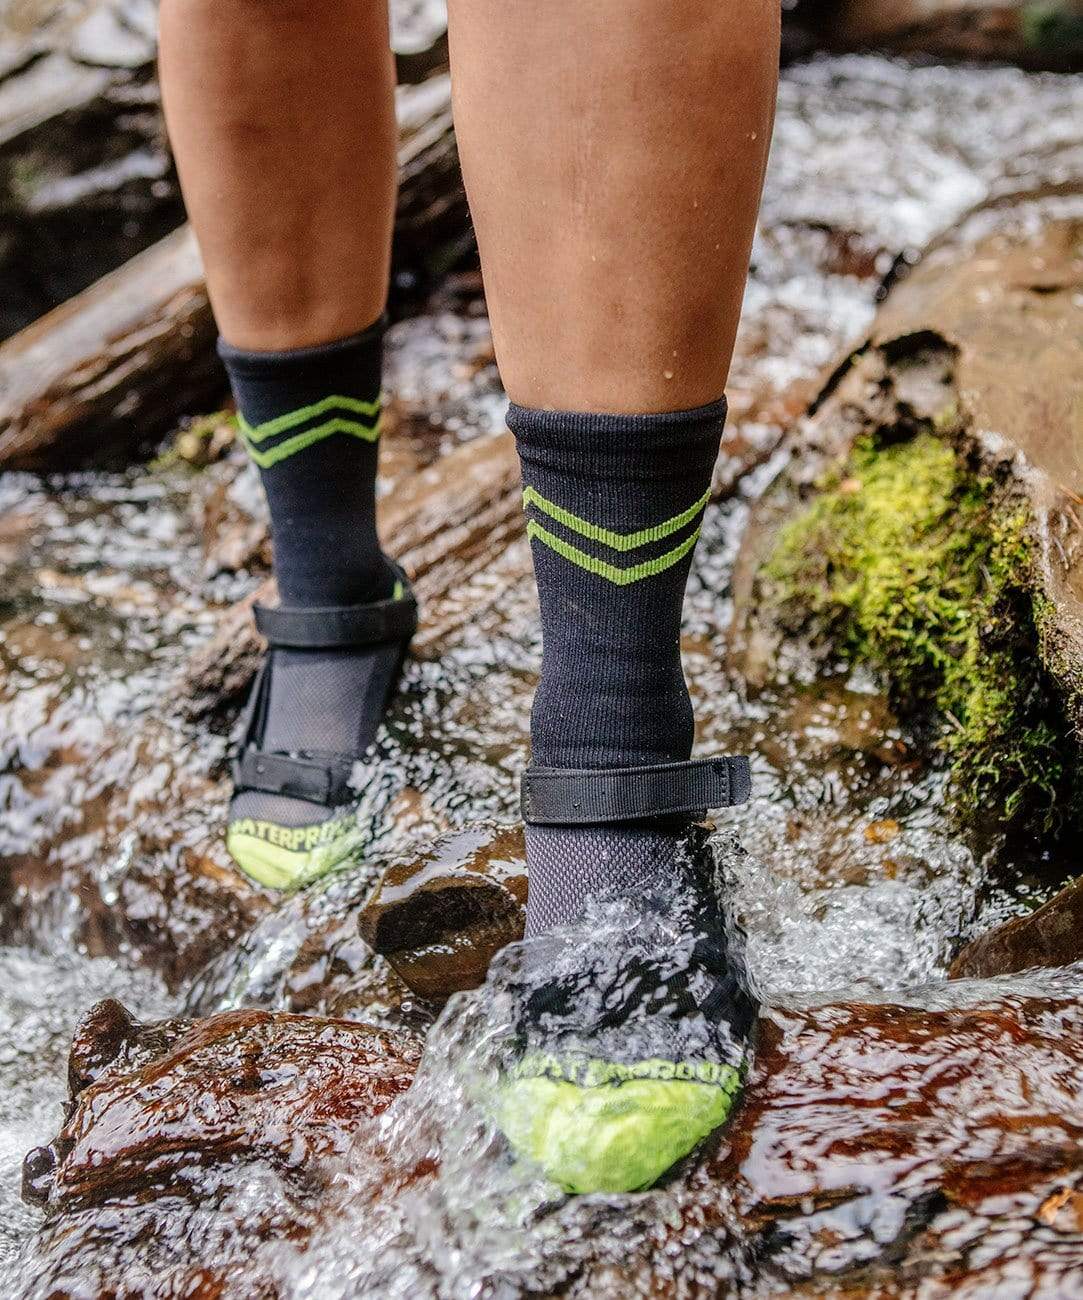 Eleventh Must-Have - Waterproof Socks (Or Just A LOT of Socks)